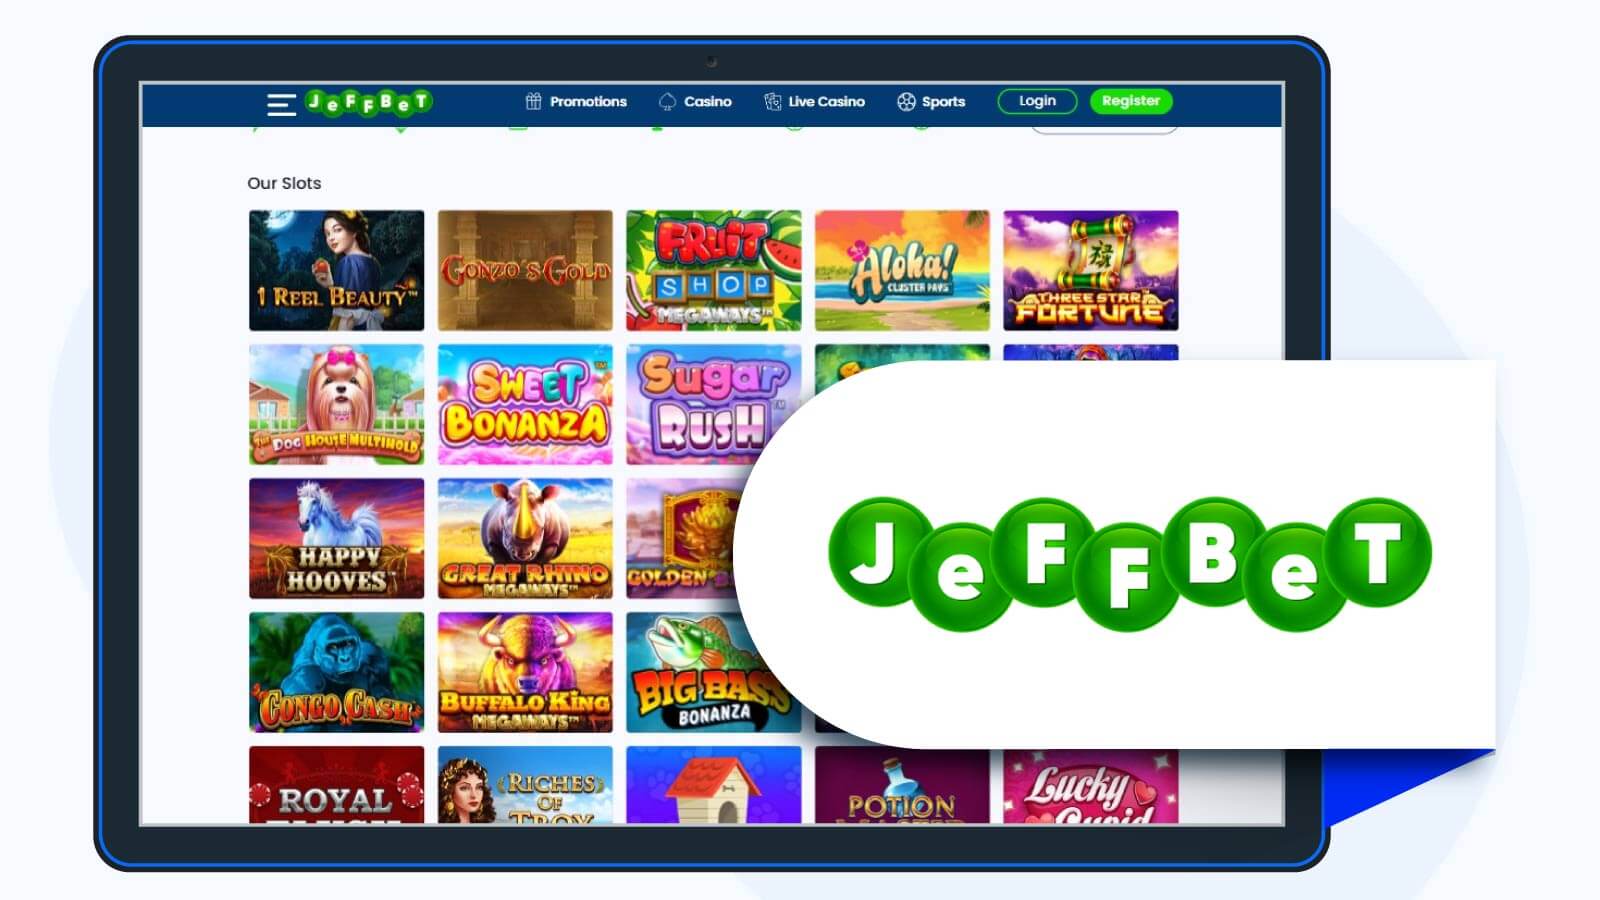 Rainbow Riches - Pay by phone bill and Play with 20 no wager spins at JeffBet Casino